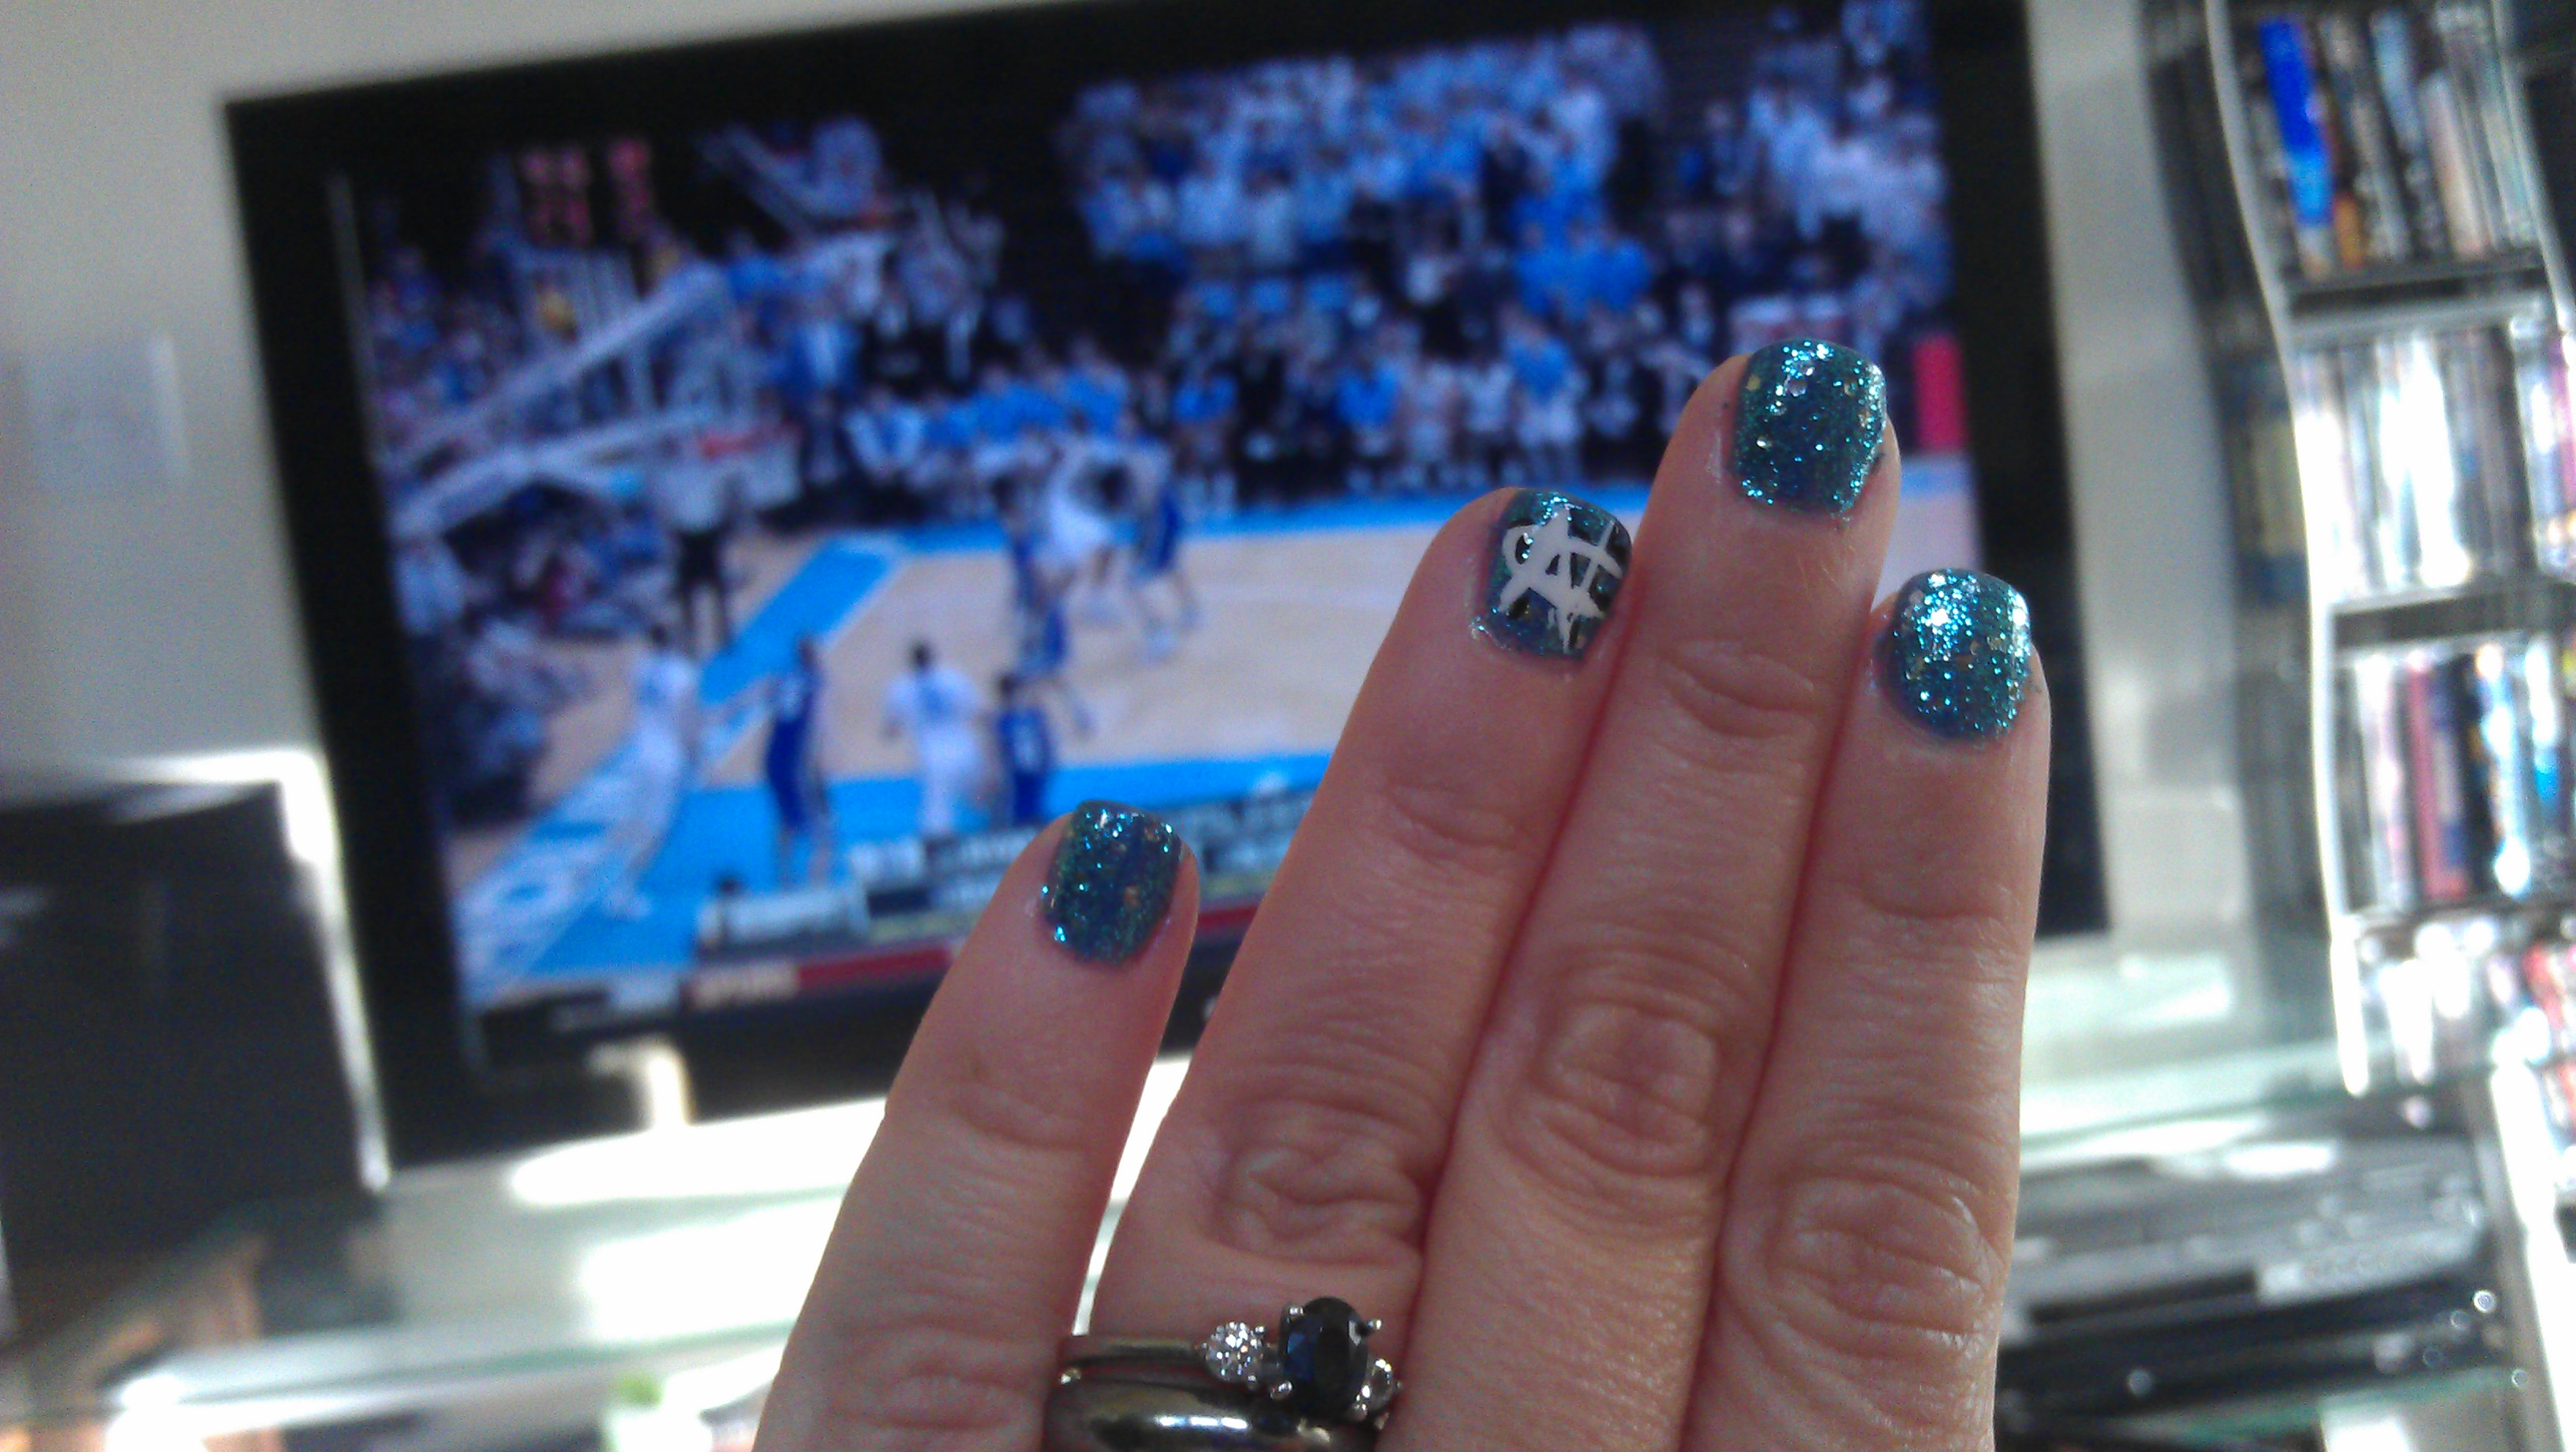 2/8/2012 watching the UNC-Dook game